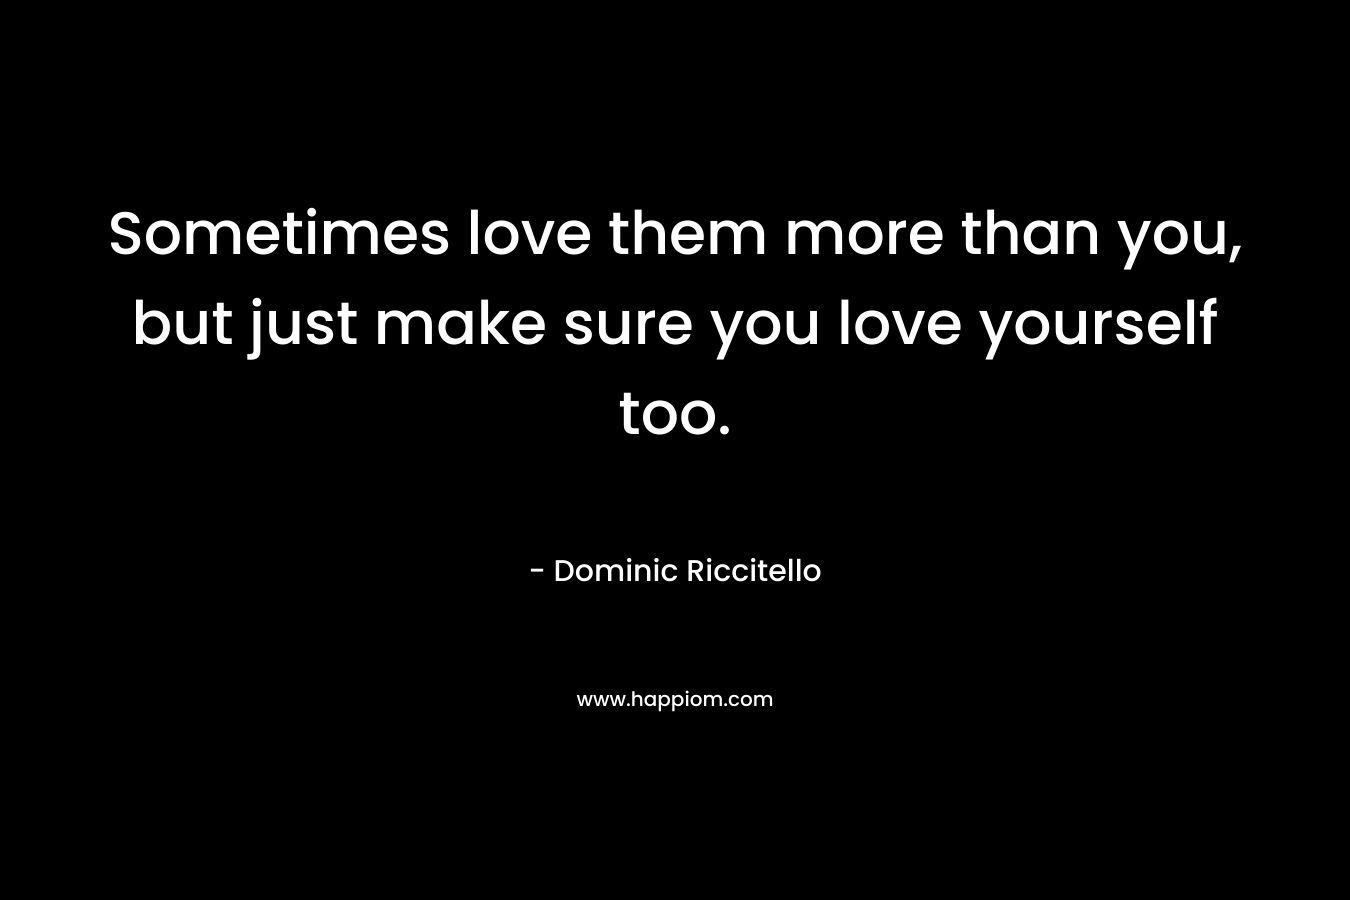 Sometimes love them more than you, but just make sure you love yourself too.